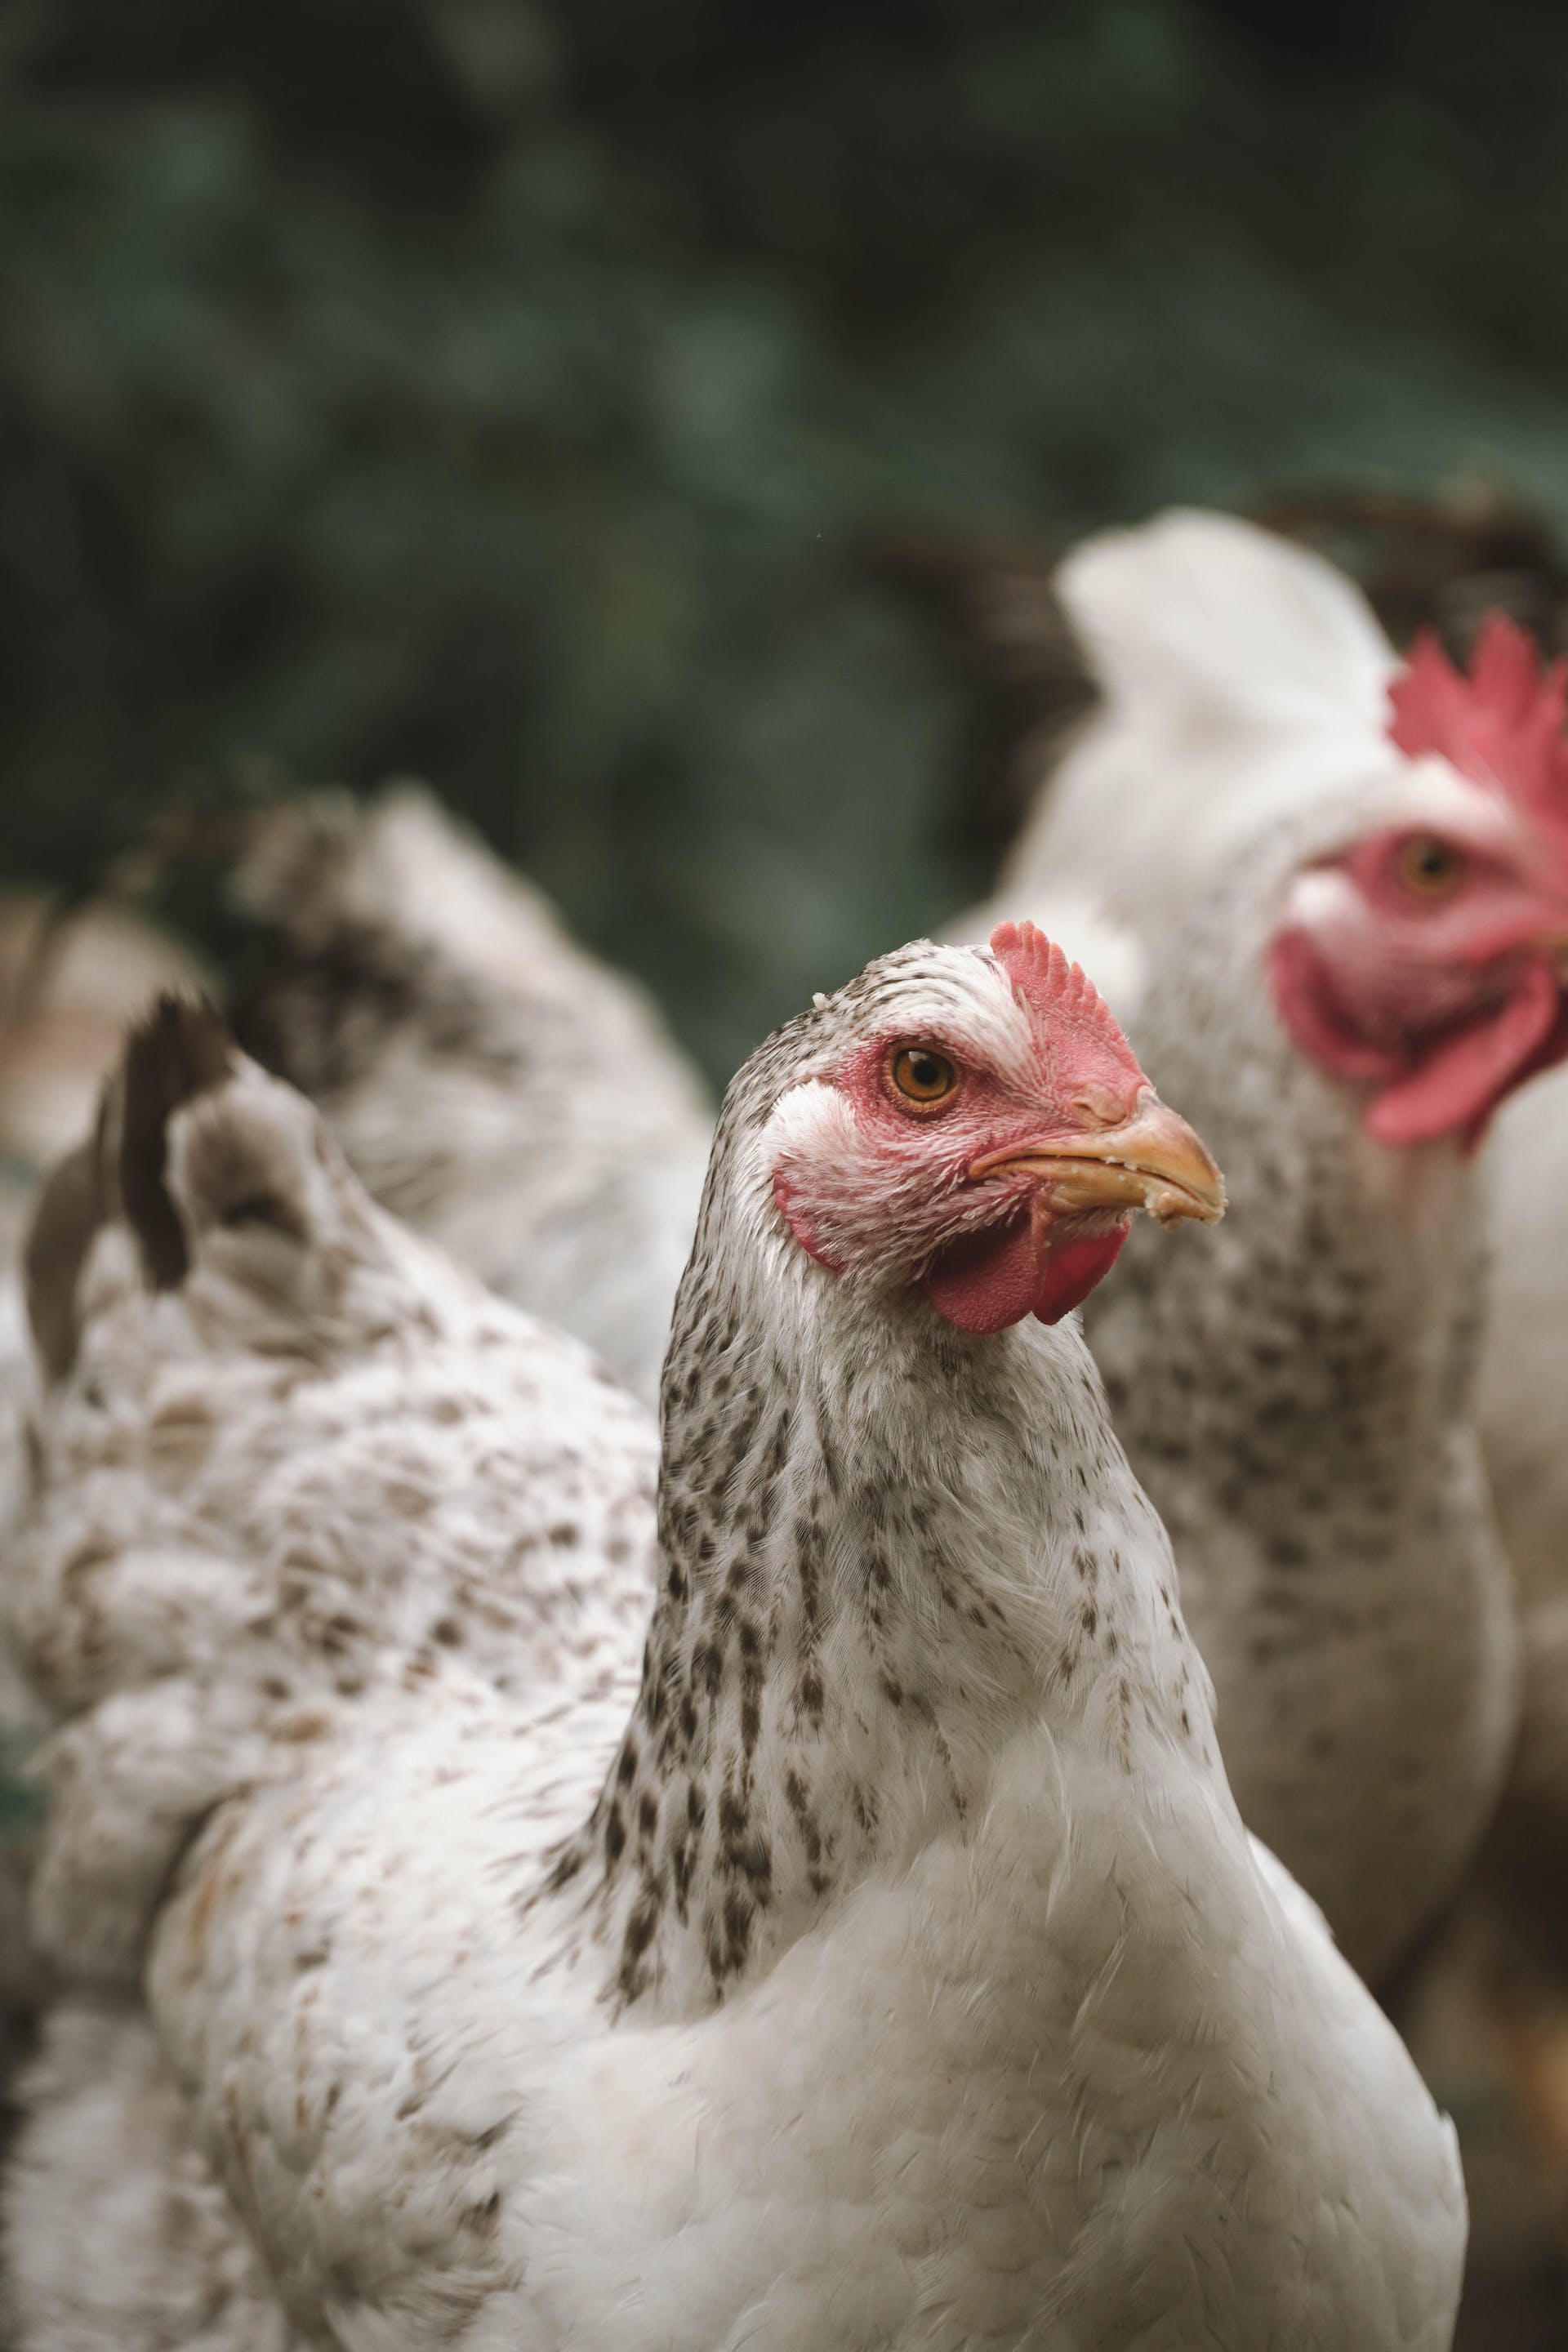 Close-up of chicken | Source: Pexels